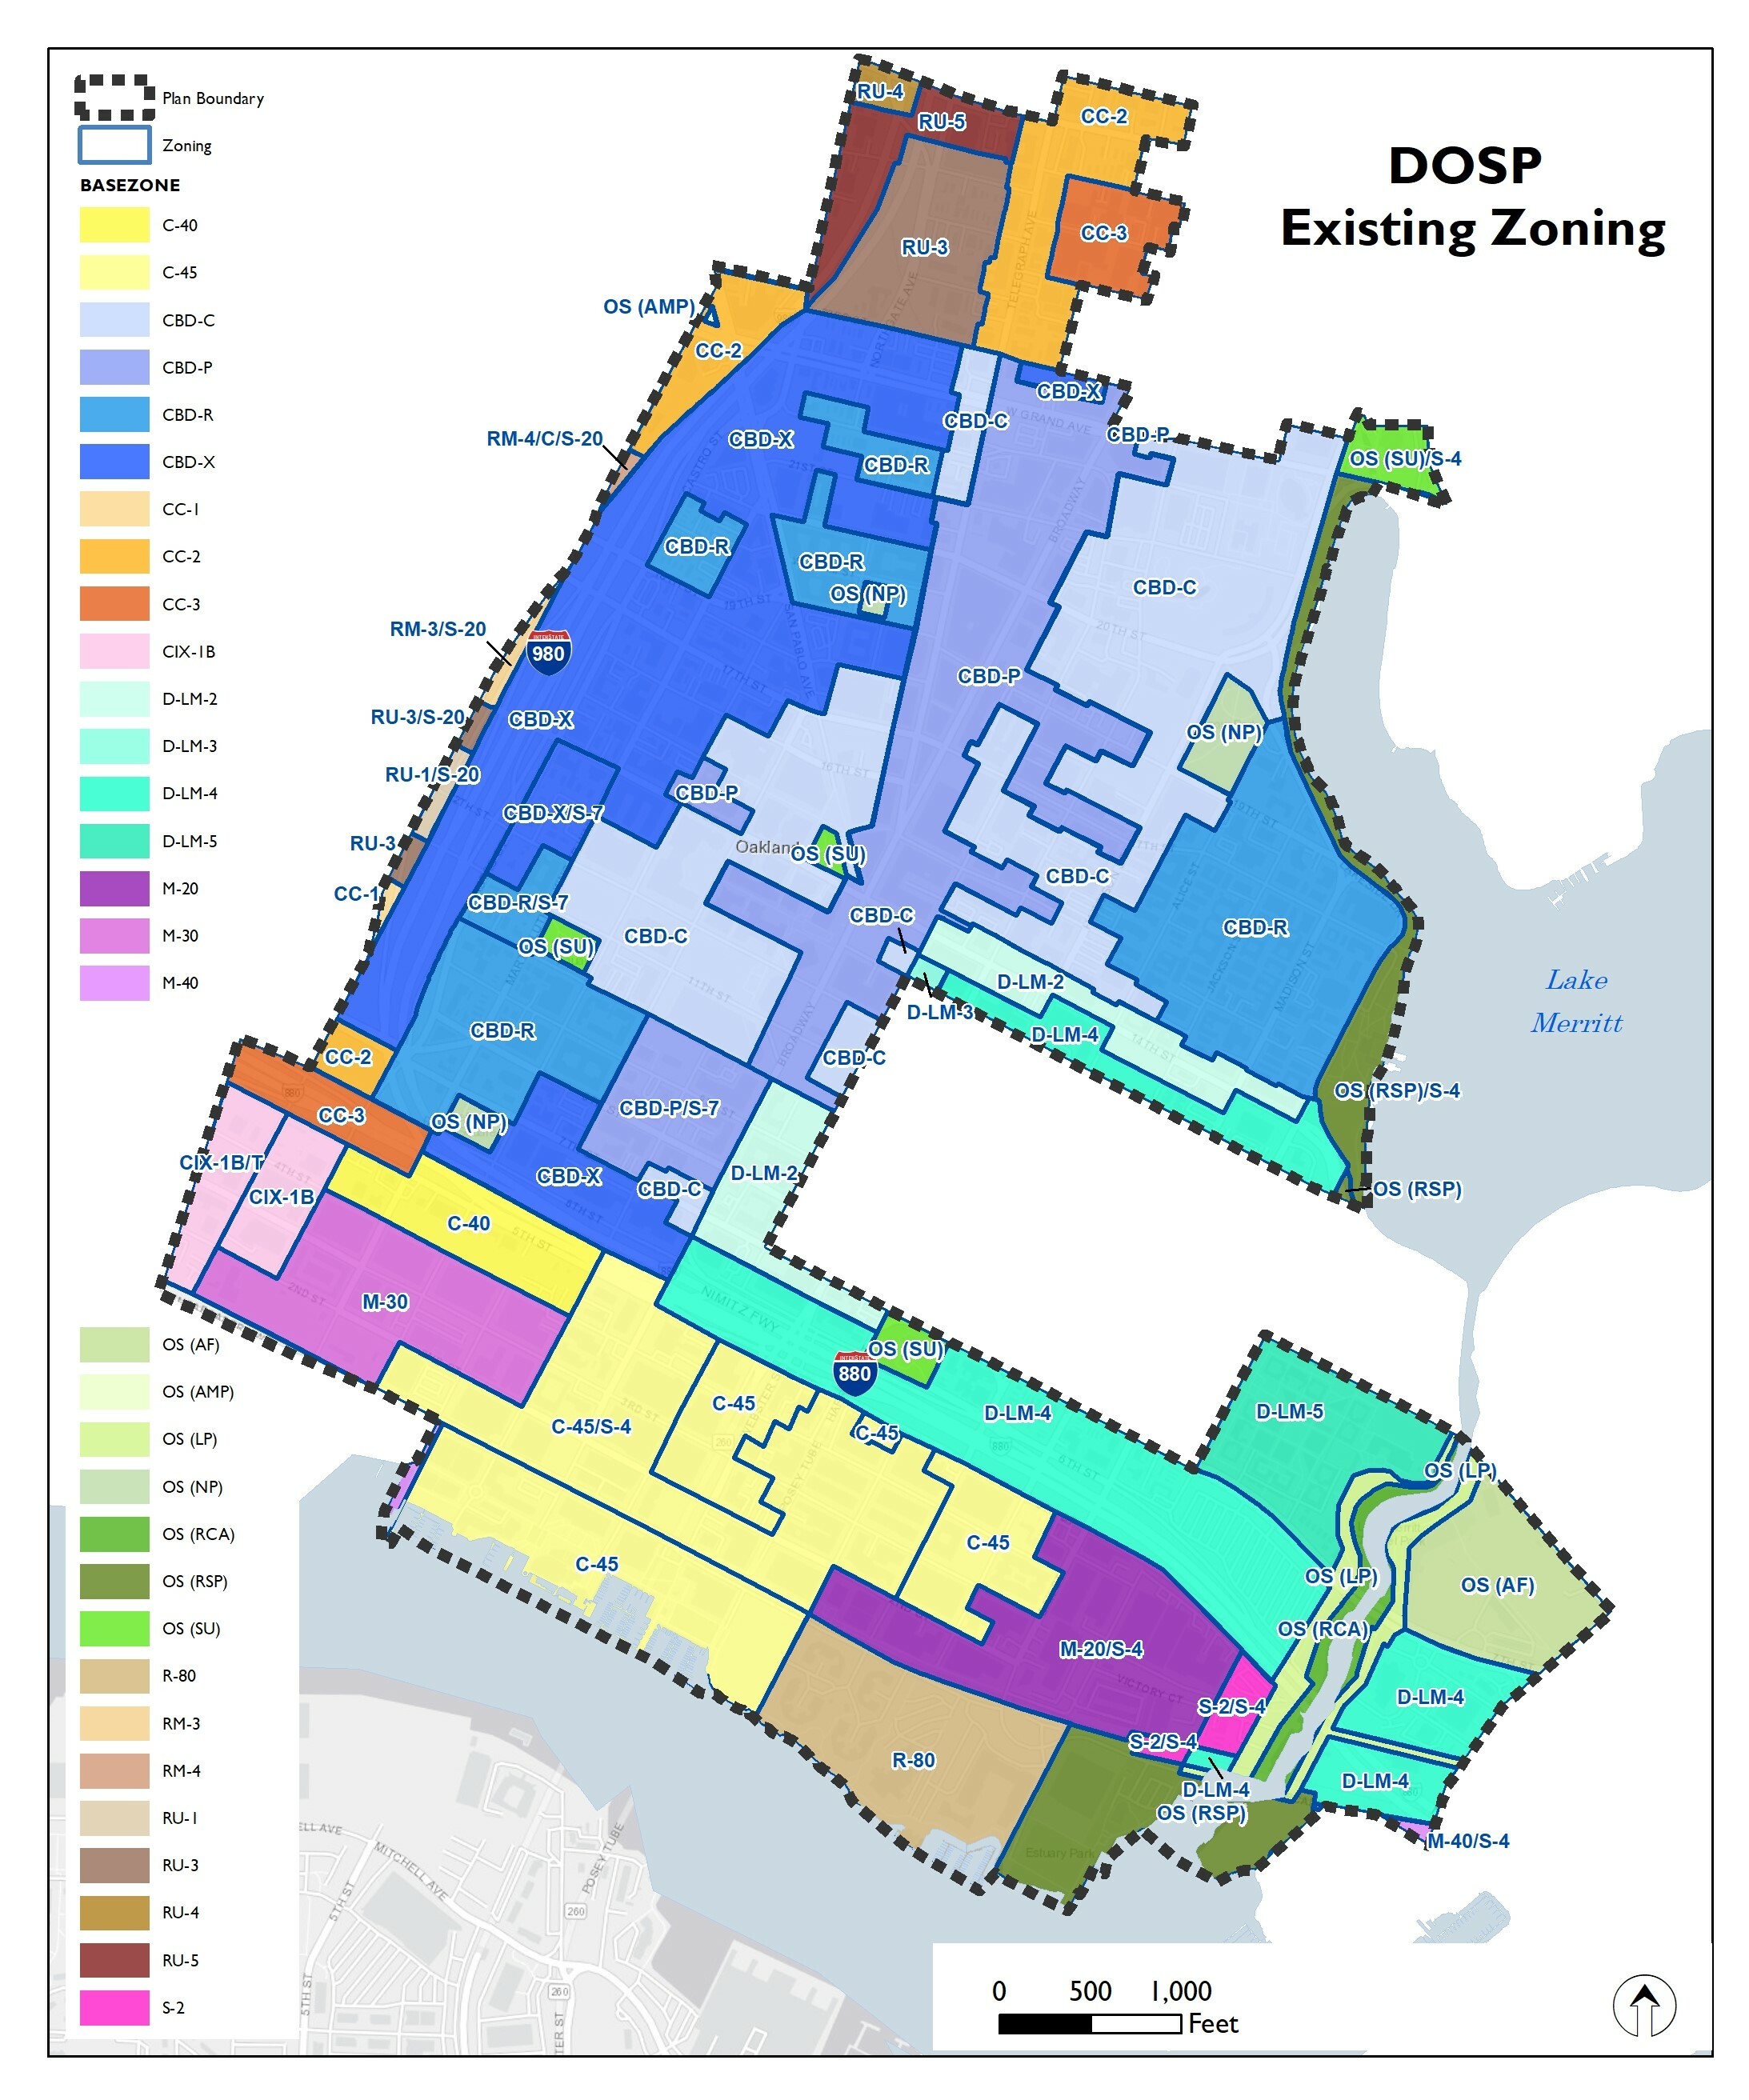 DOSP Existing Zoning Map